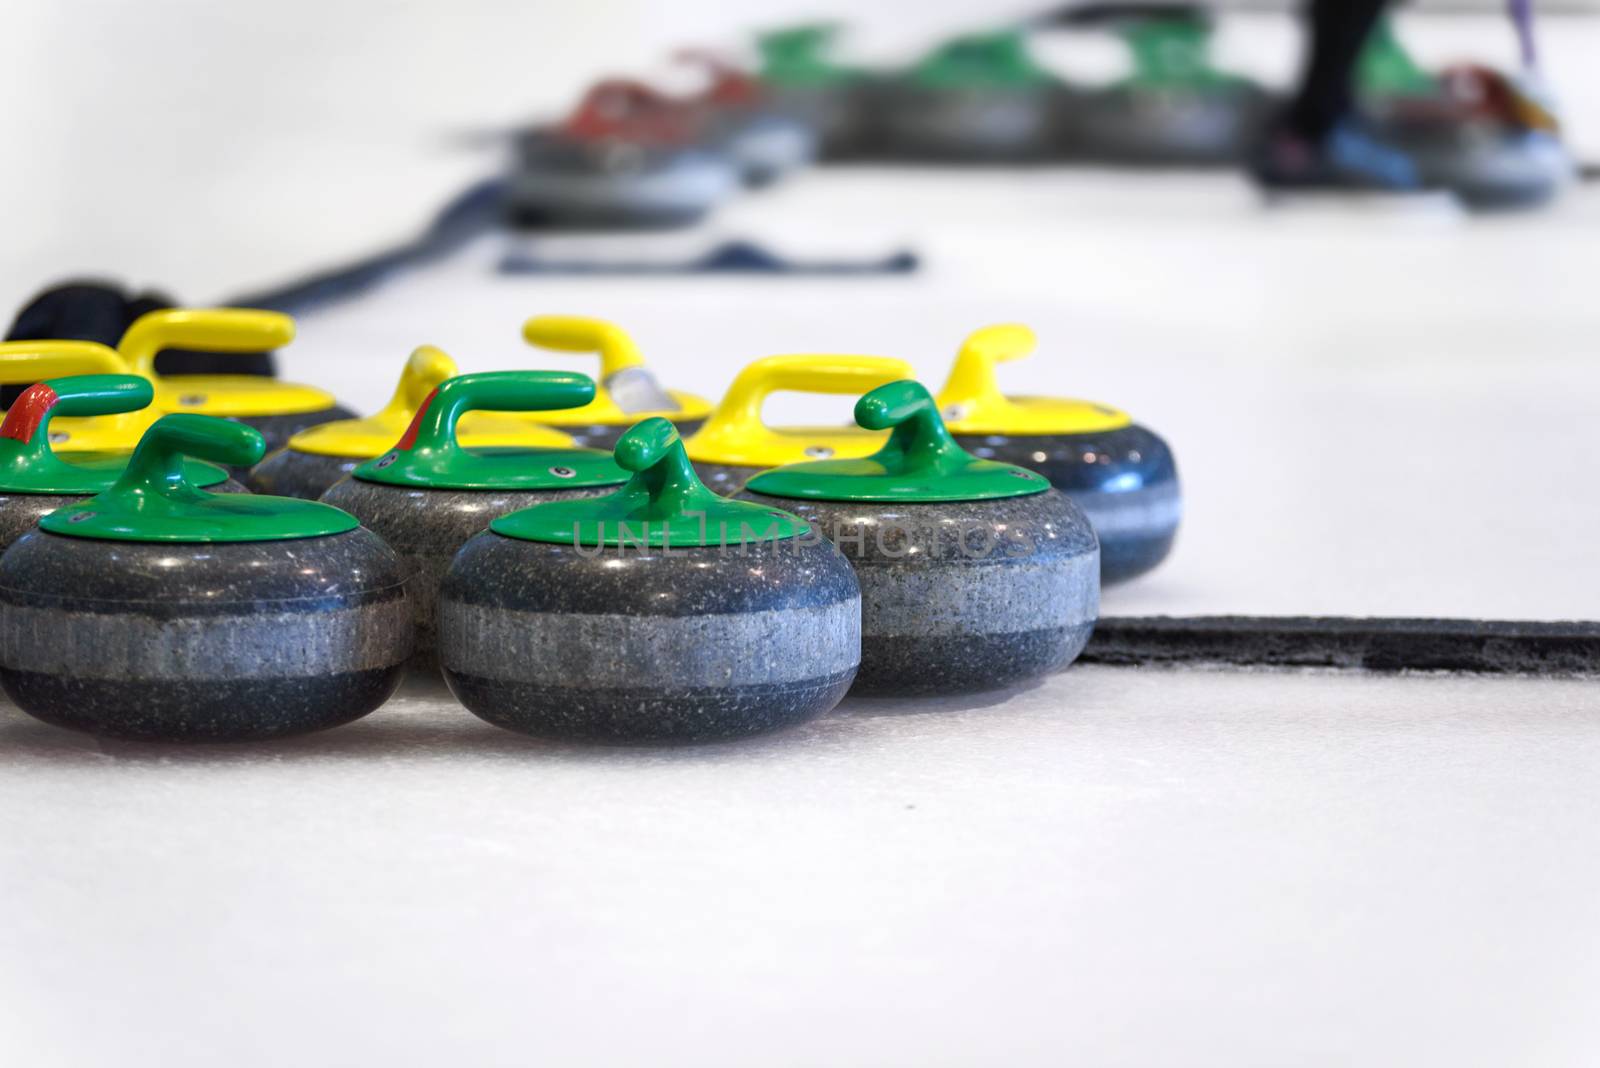 Curling stones on the ice by wdnet_studio